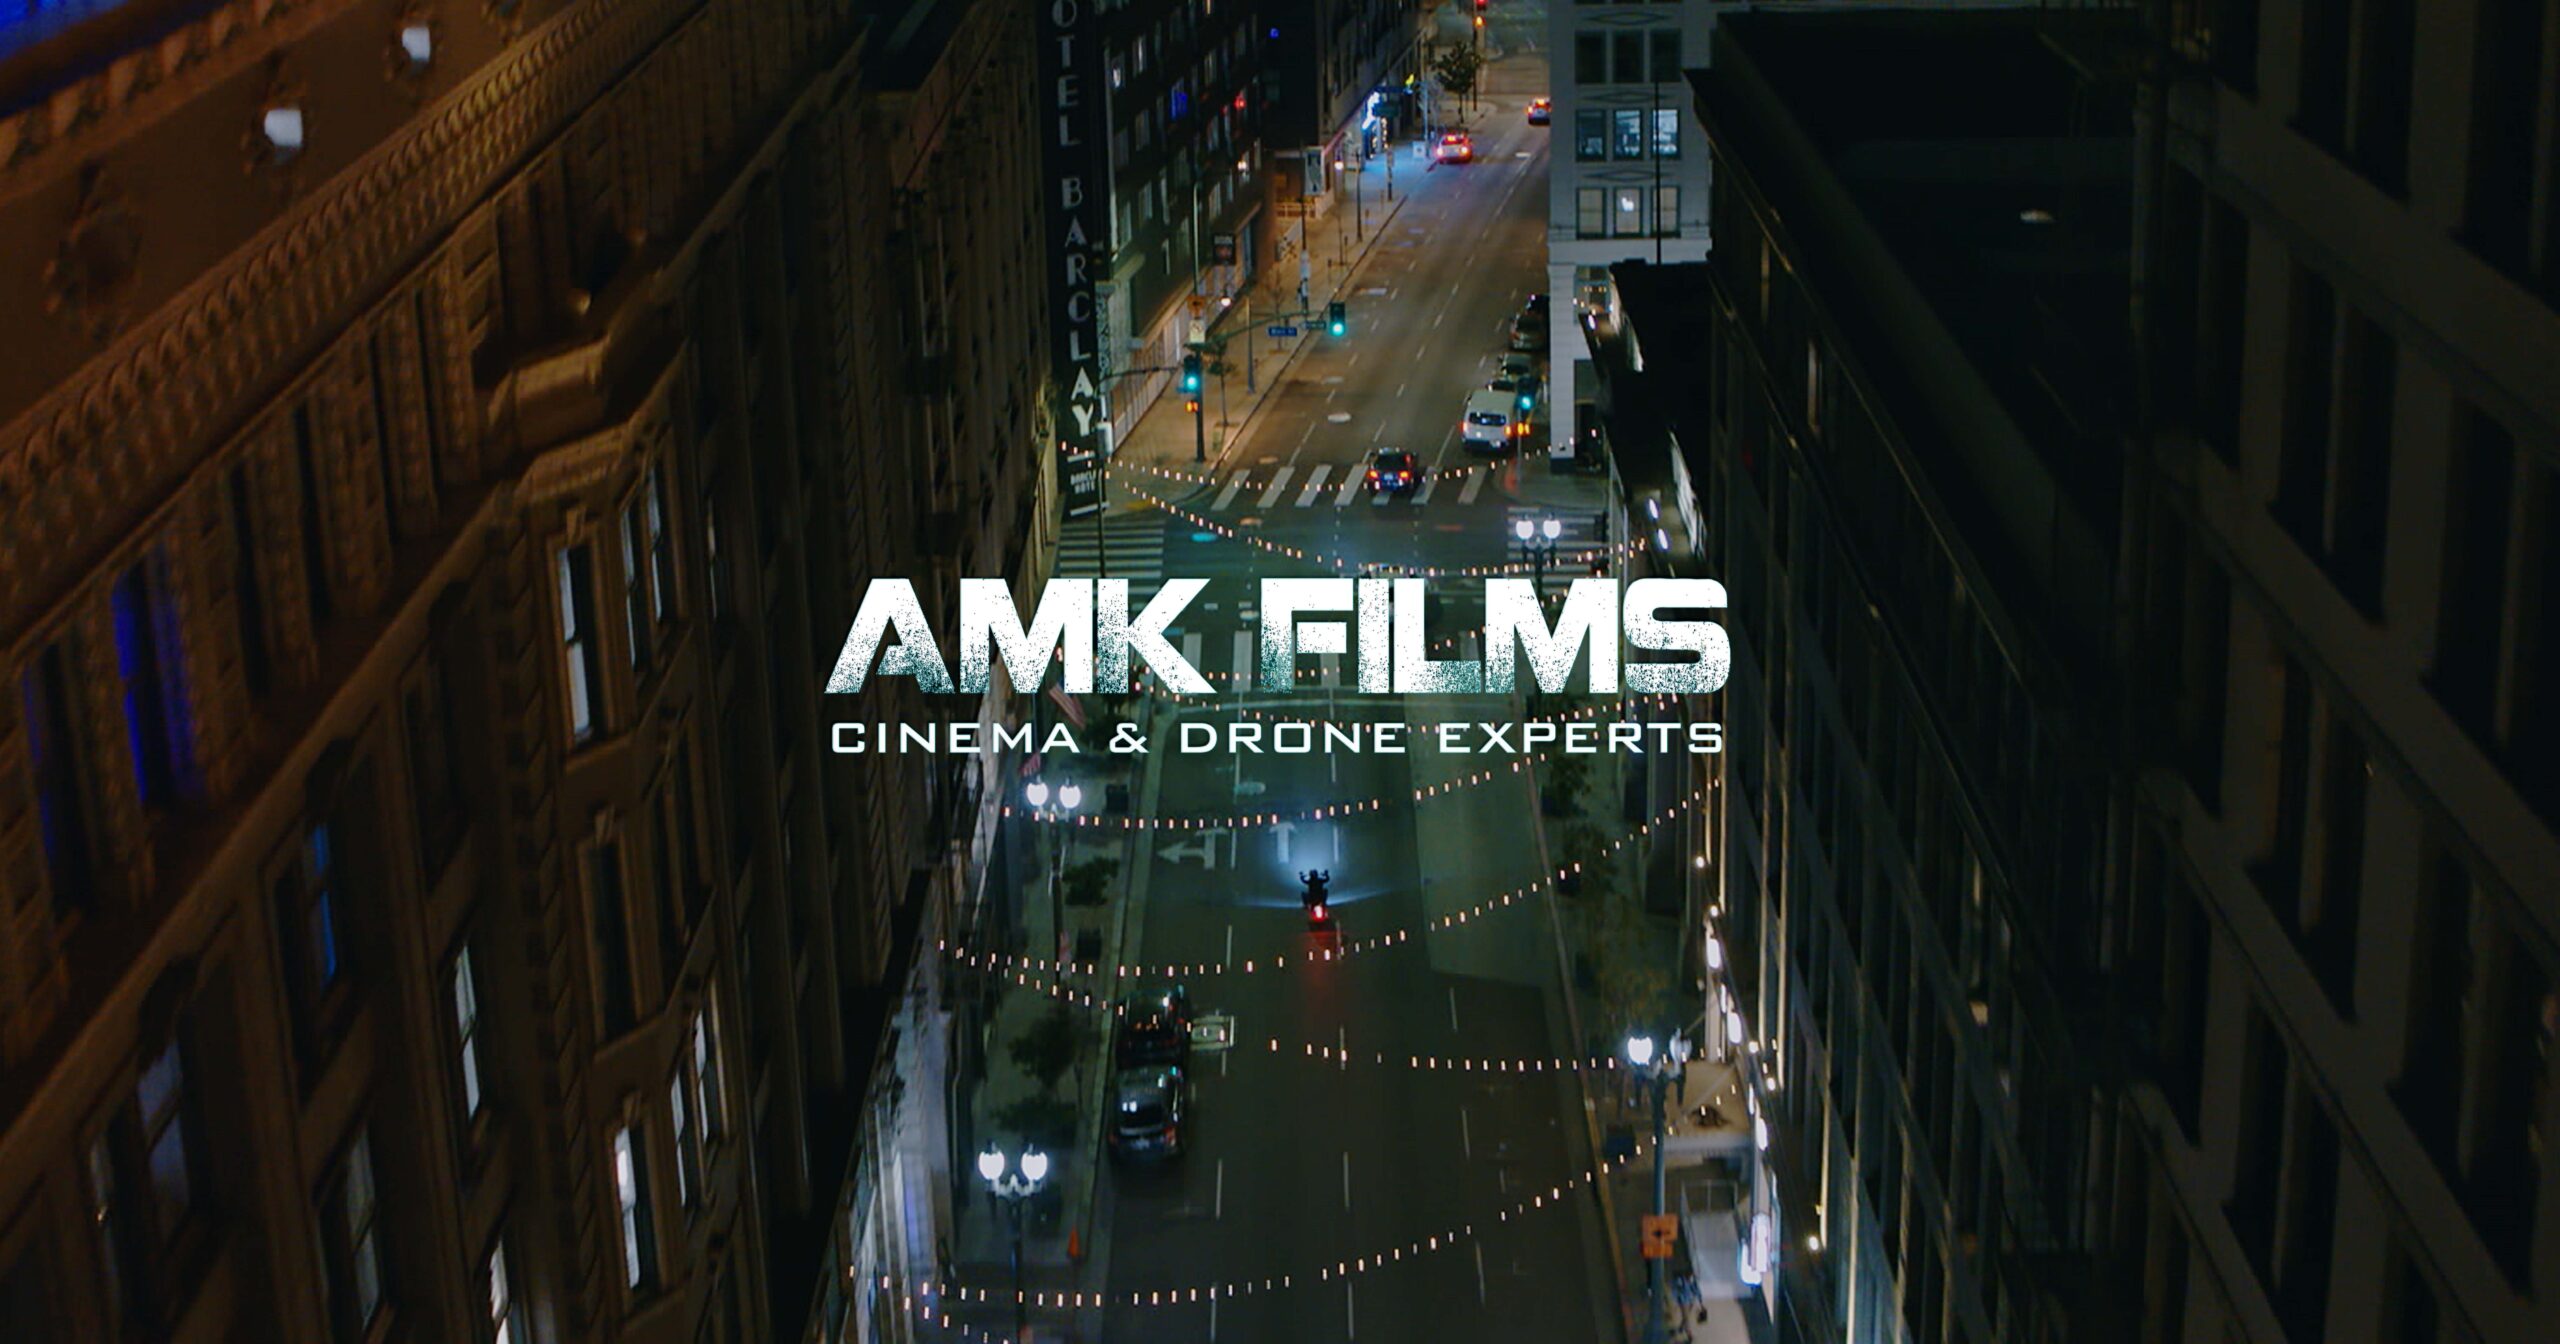 Aerial view of the Arts District in downtown Los Angeles with the AMK Films logo overlay, captured in 2022.